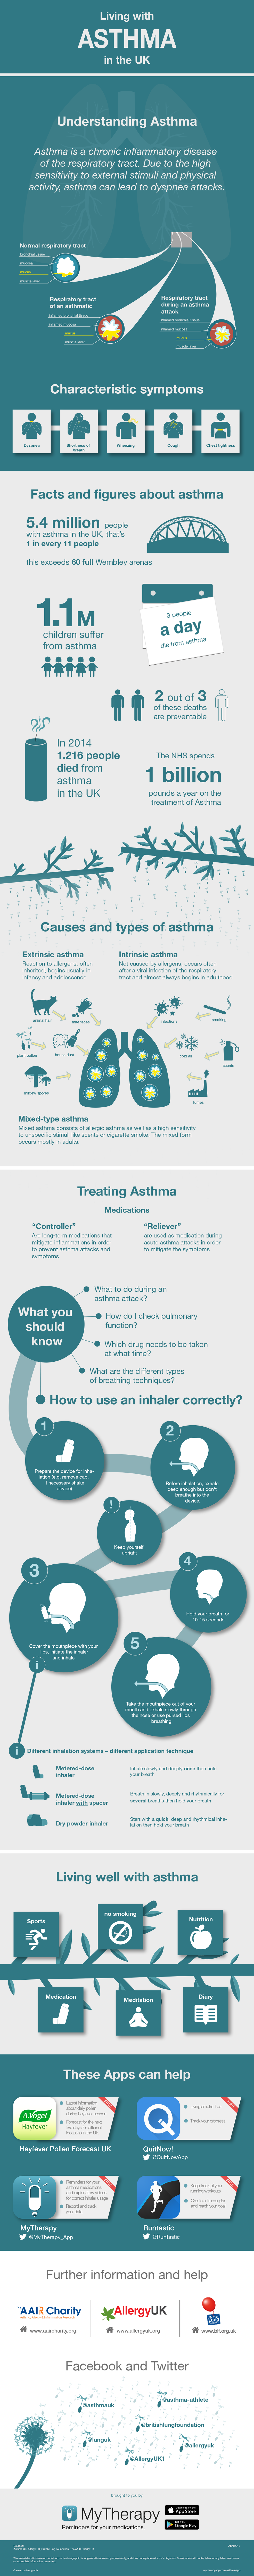 Asthma in the UK Infographic with facts and asthma apps